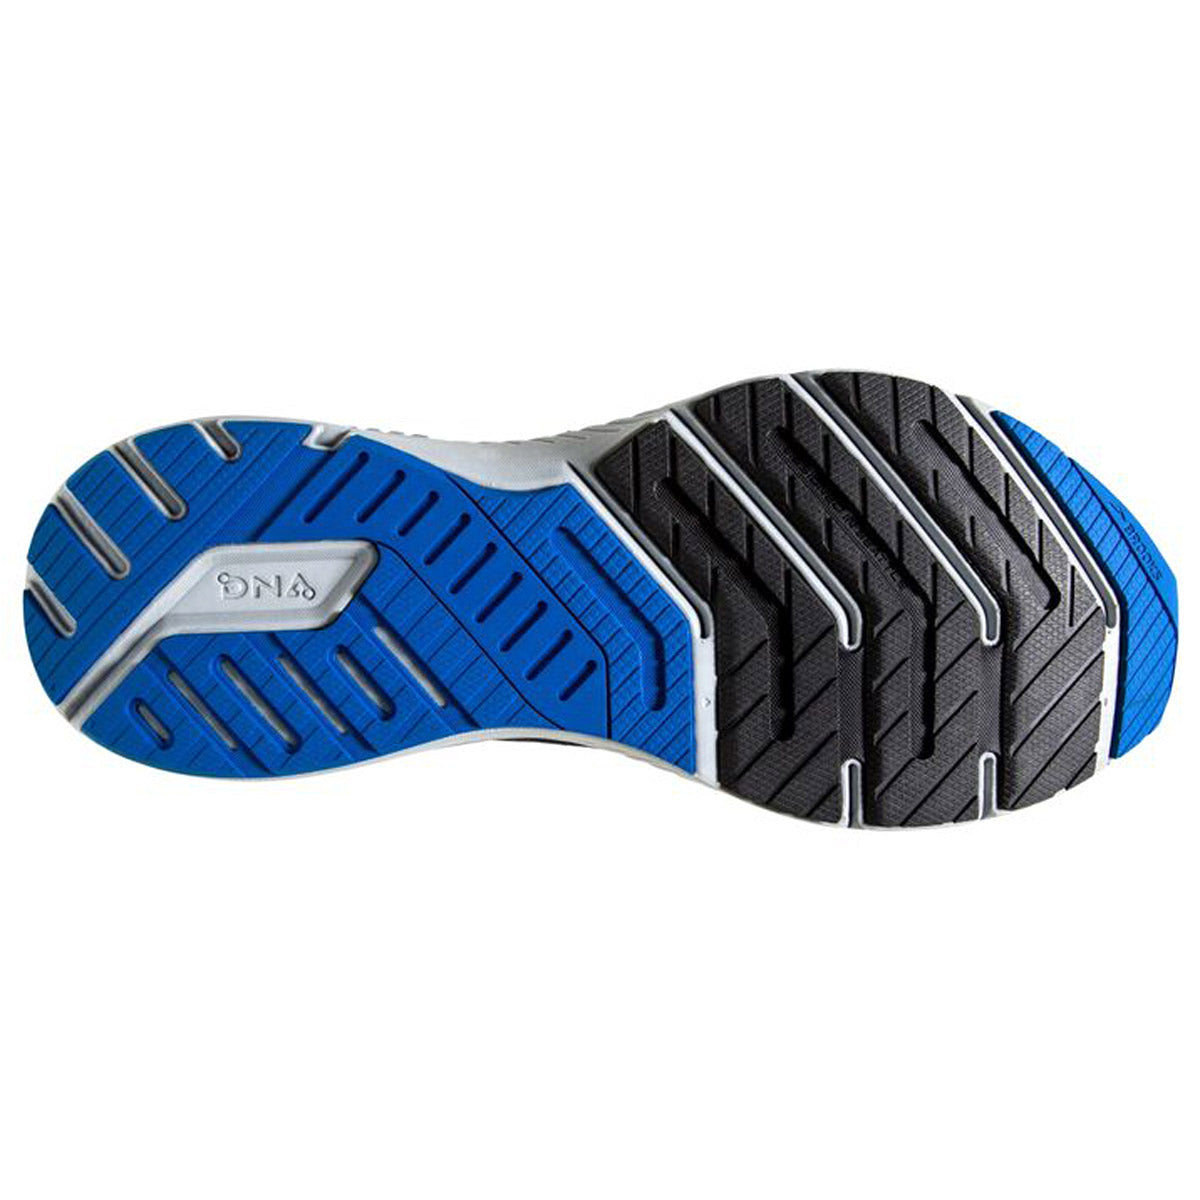 Tread pattern of a BROOKS LAUNCH GTS 8 BLACK/GREY - MENS sport shoe sole with blue and black detailing, featuring the GuideRails holistic support system.